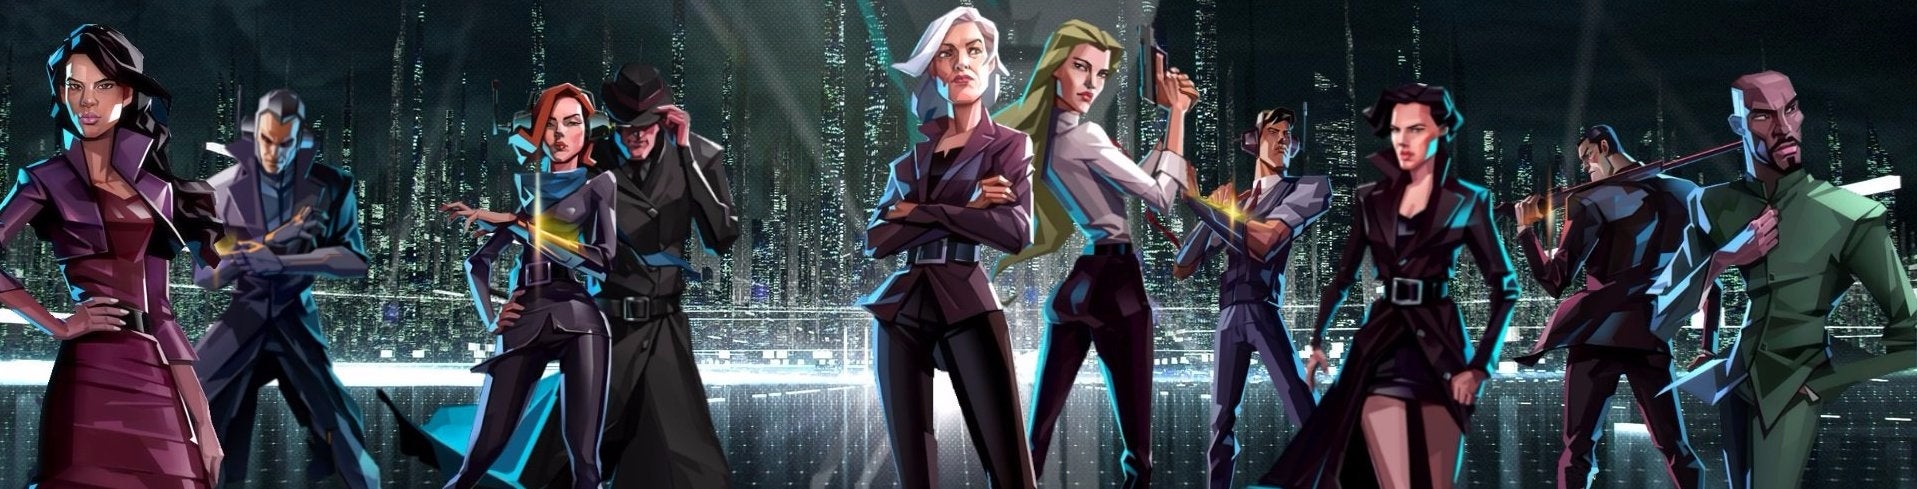 Image for Games of 2015 no. 7: Invisible, Inc.